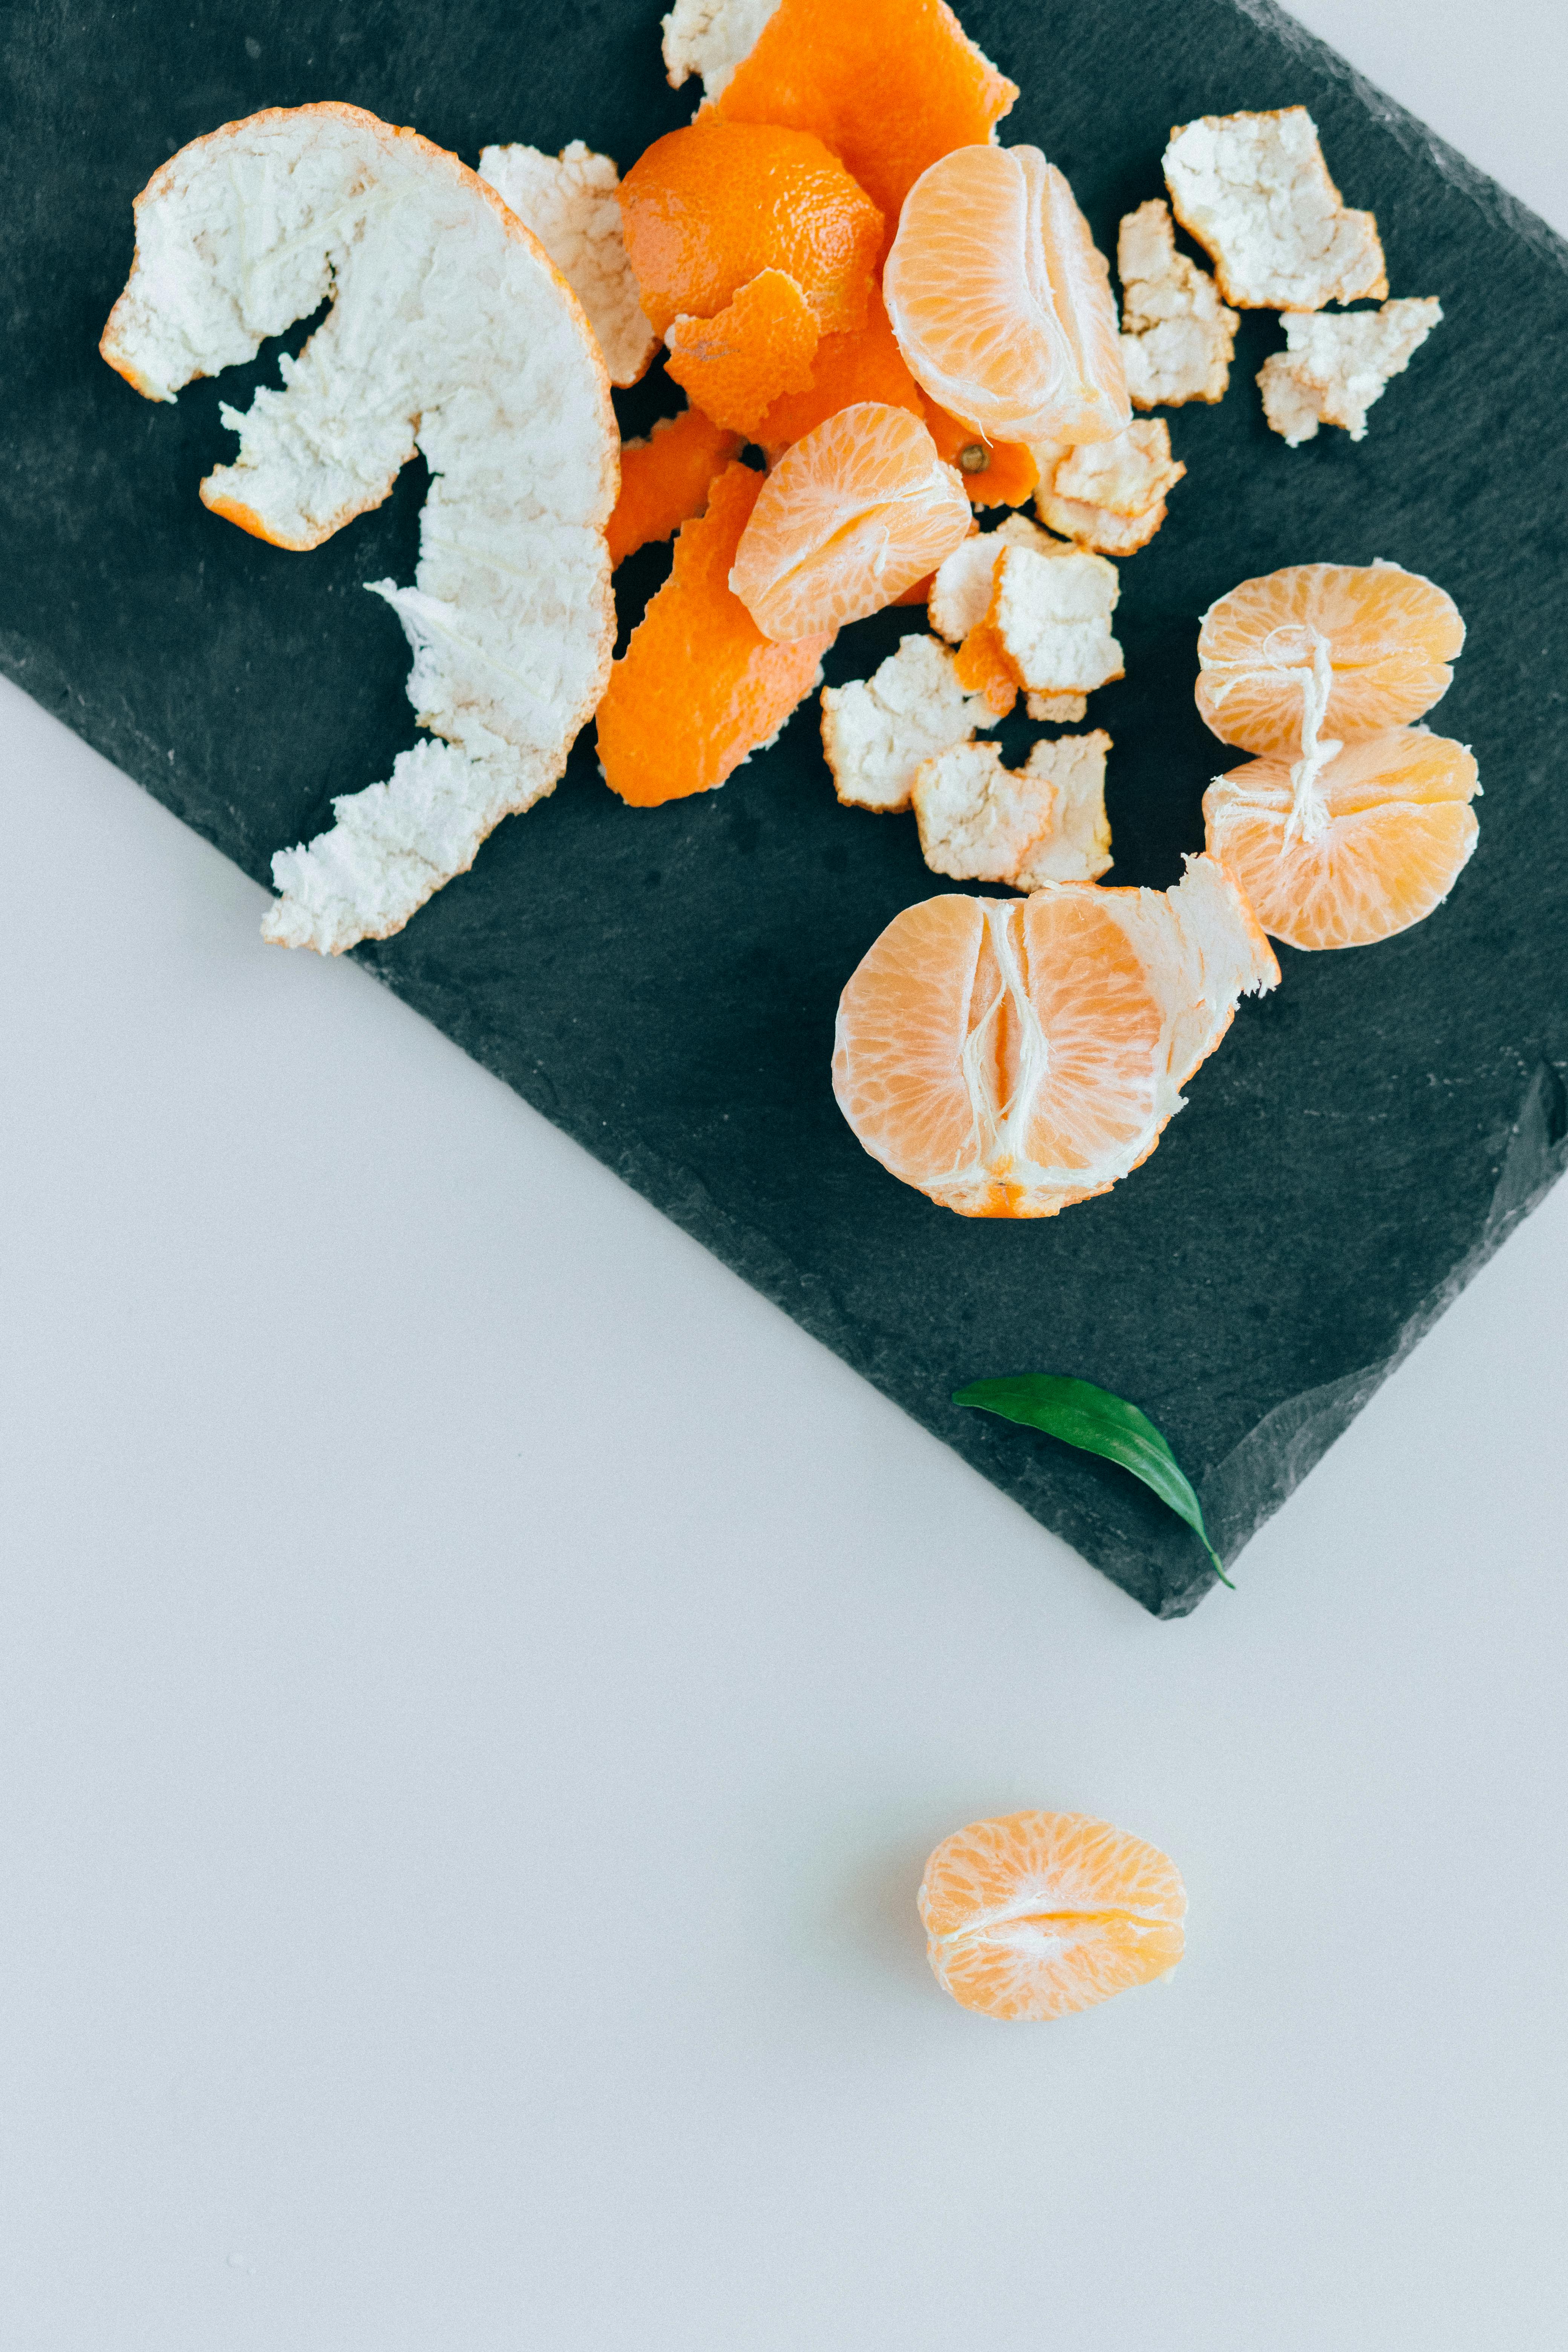 pieces of mandarin fruit and peel on a chopping board